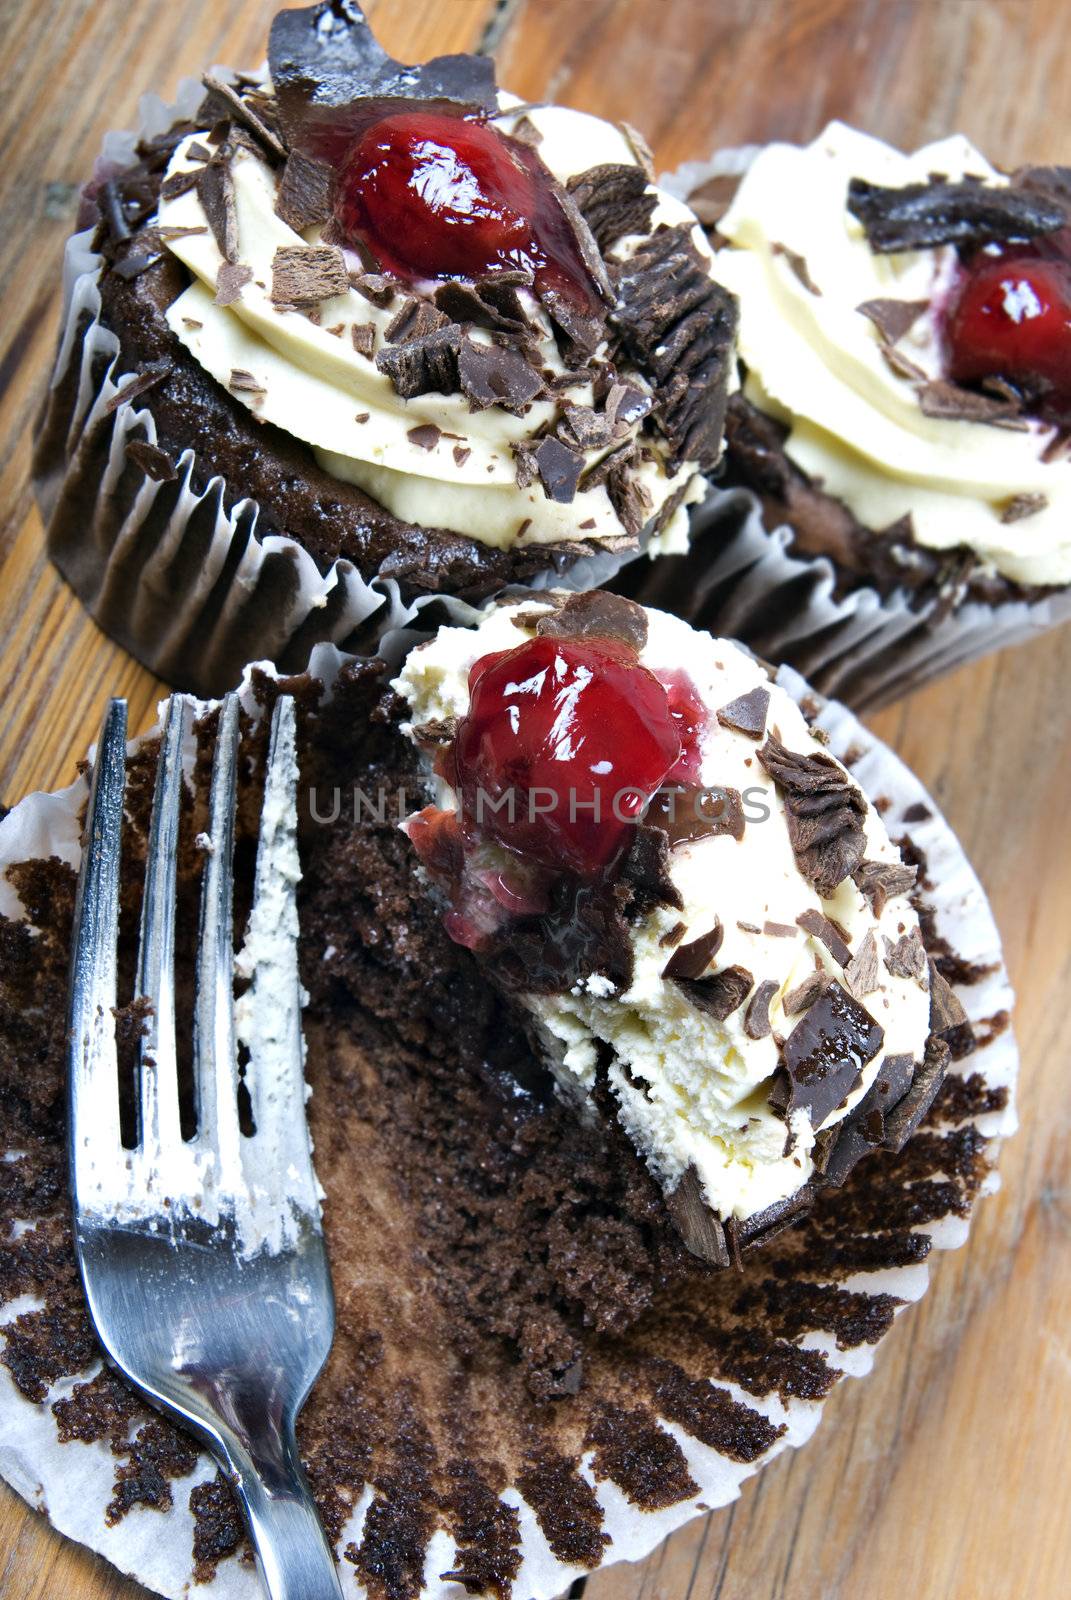 Lovely fresh chocolate cupcakes by tish1